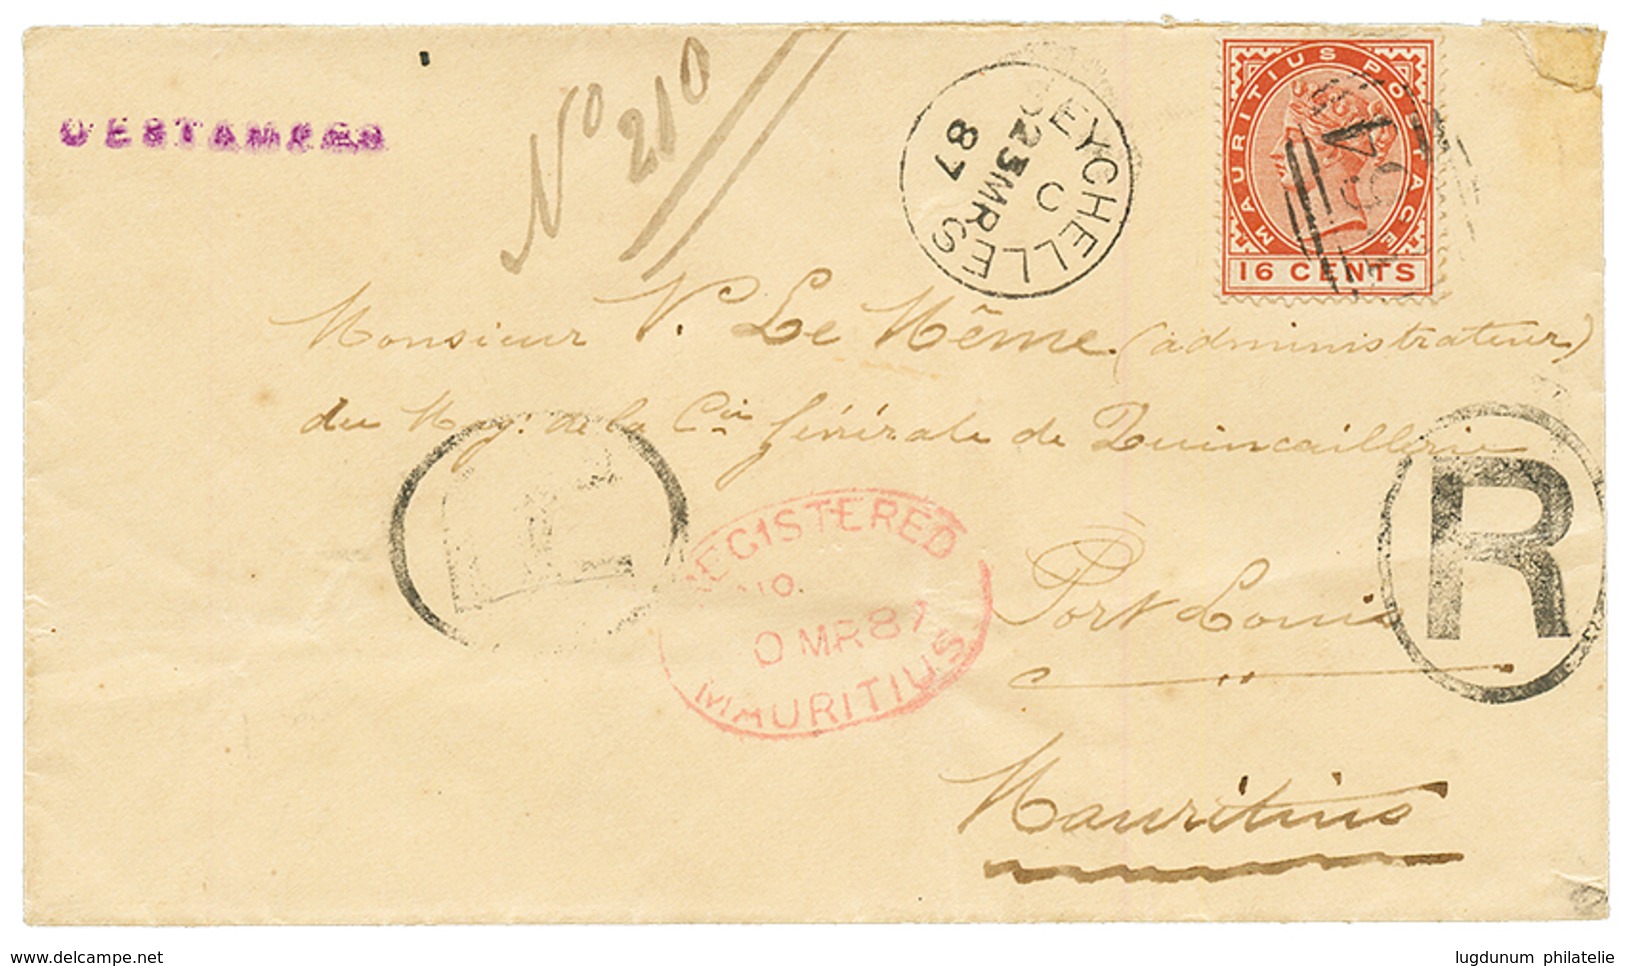 SEYCHELLES : 1887 MAURITIUS 16c Canc. B64 + SEYCHELLES On REGISTERED Envelope To MAURITIUS. REGISTERED Cover Are Of GREA - Seychelles (...-1976)